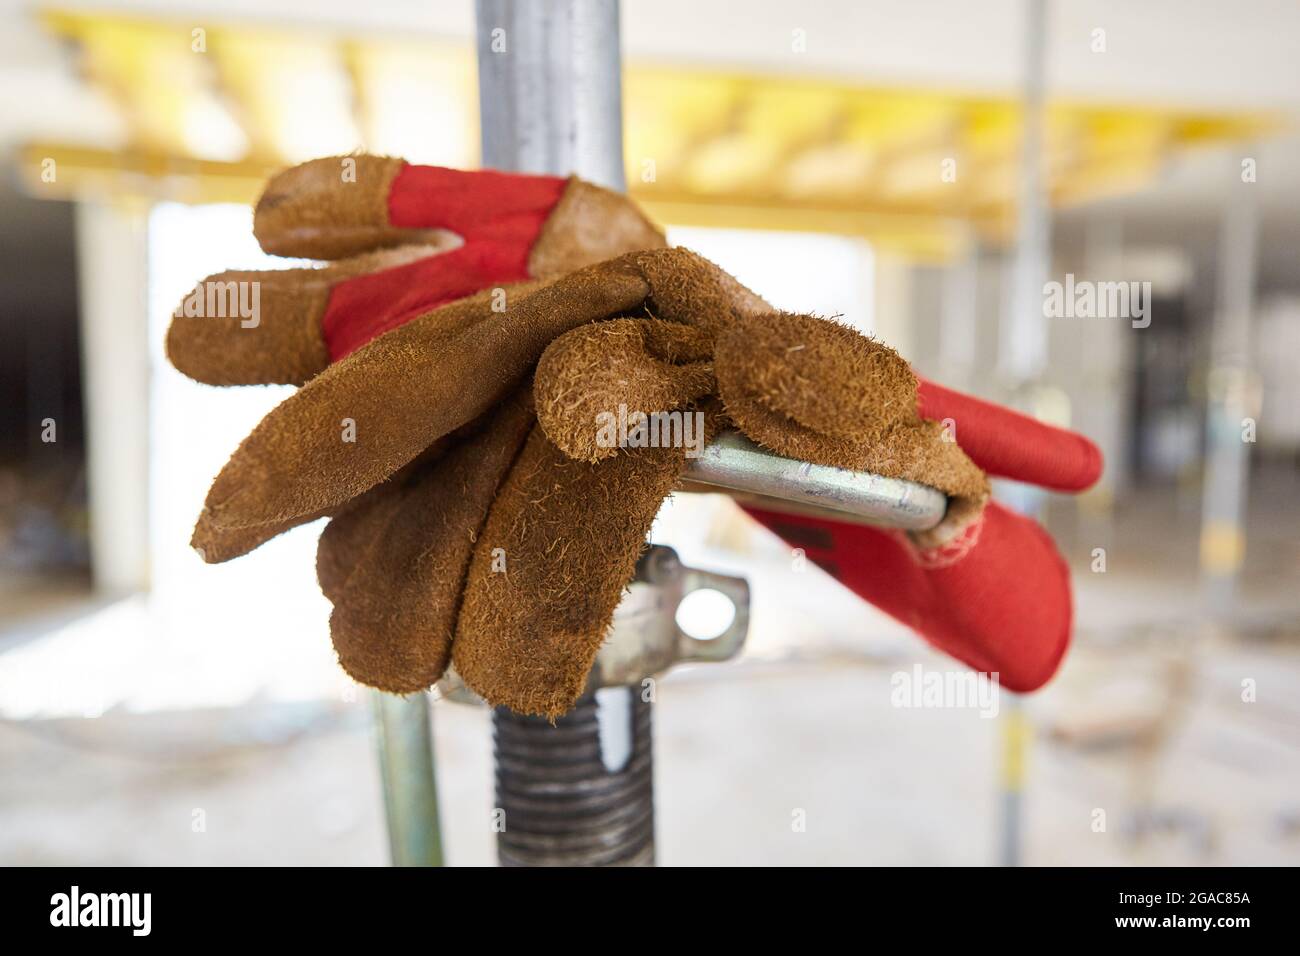 Work gloves on a construction site as a symbol for work clothes and occupational safety Stock Photo